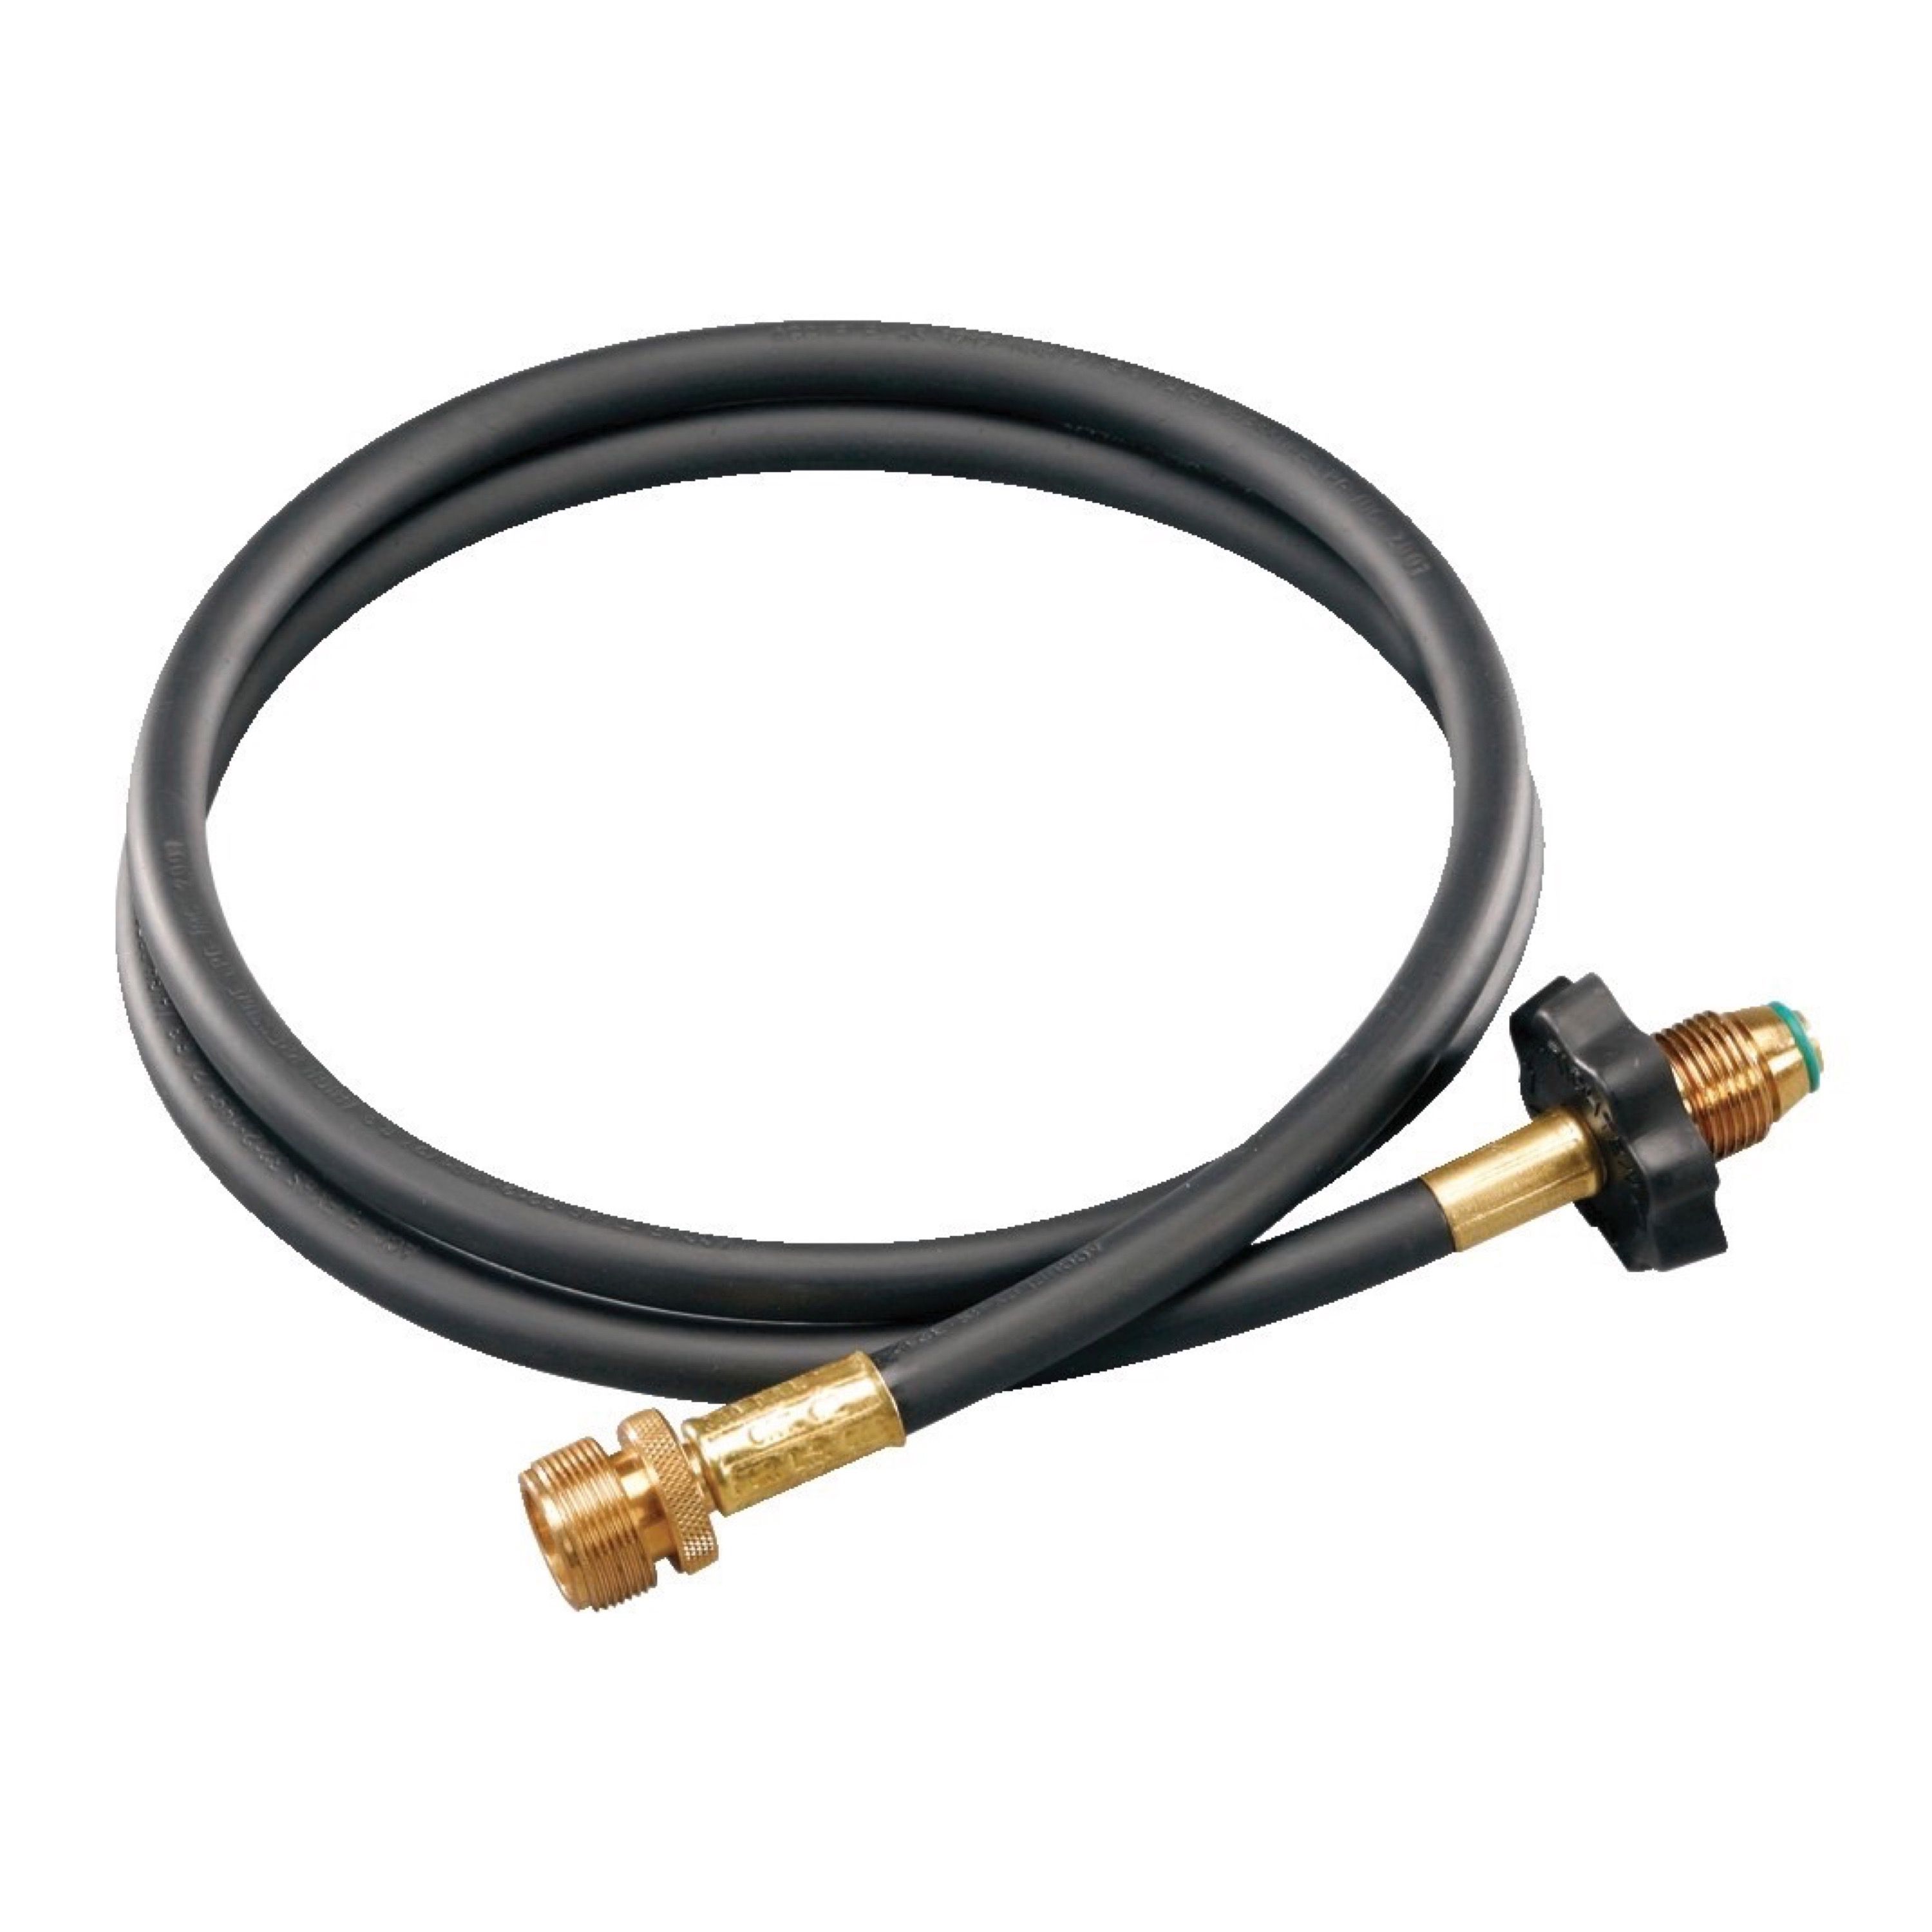 Coleman 5' High-Pressure Propane Gas Hose and Adapter Replacement - image 1 of 2